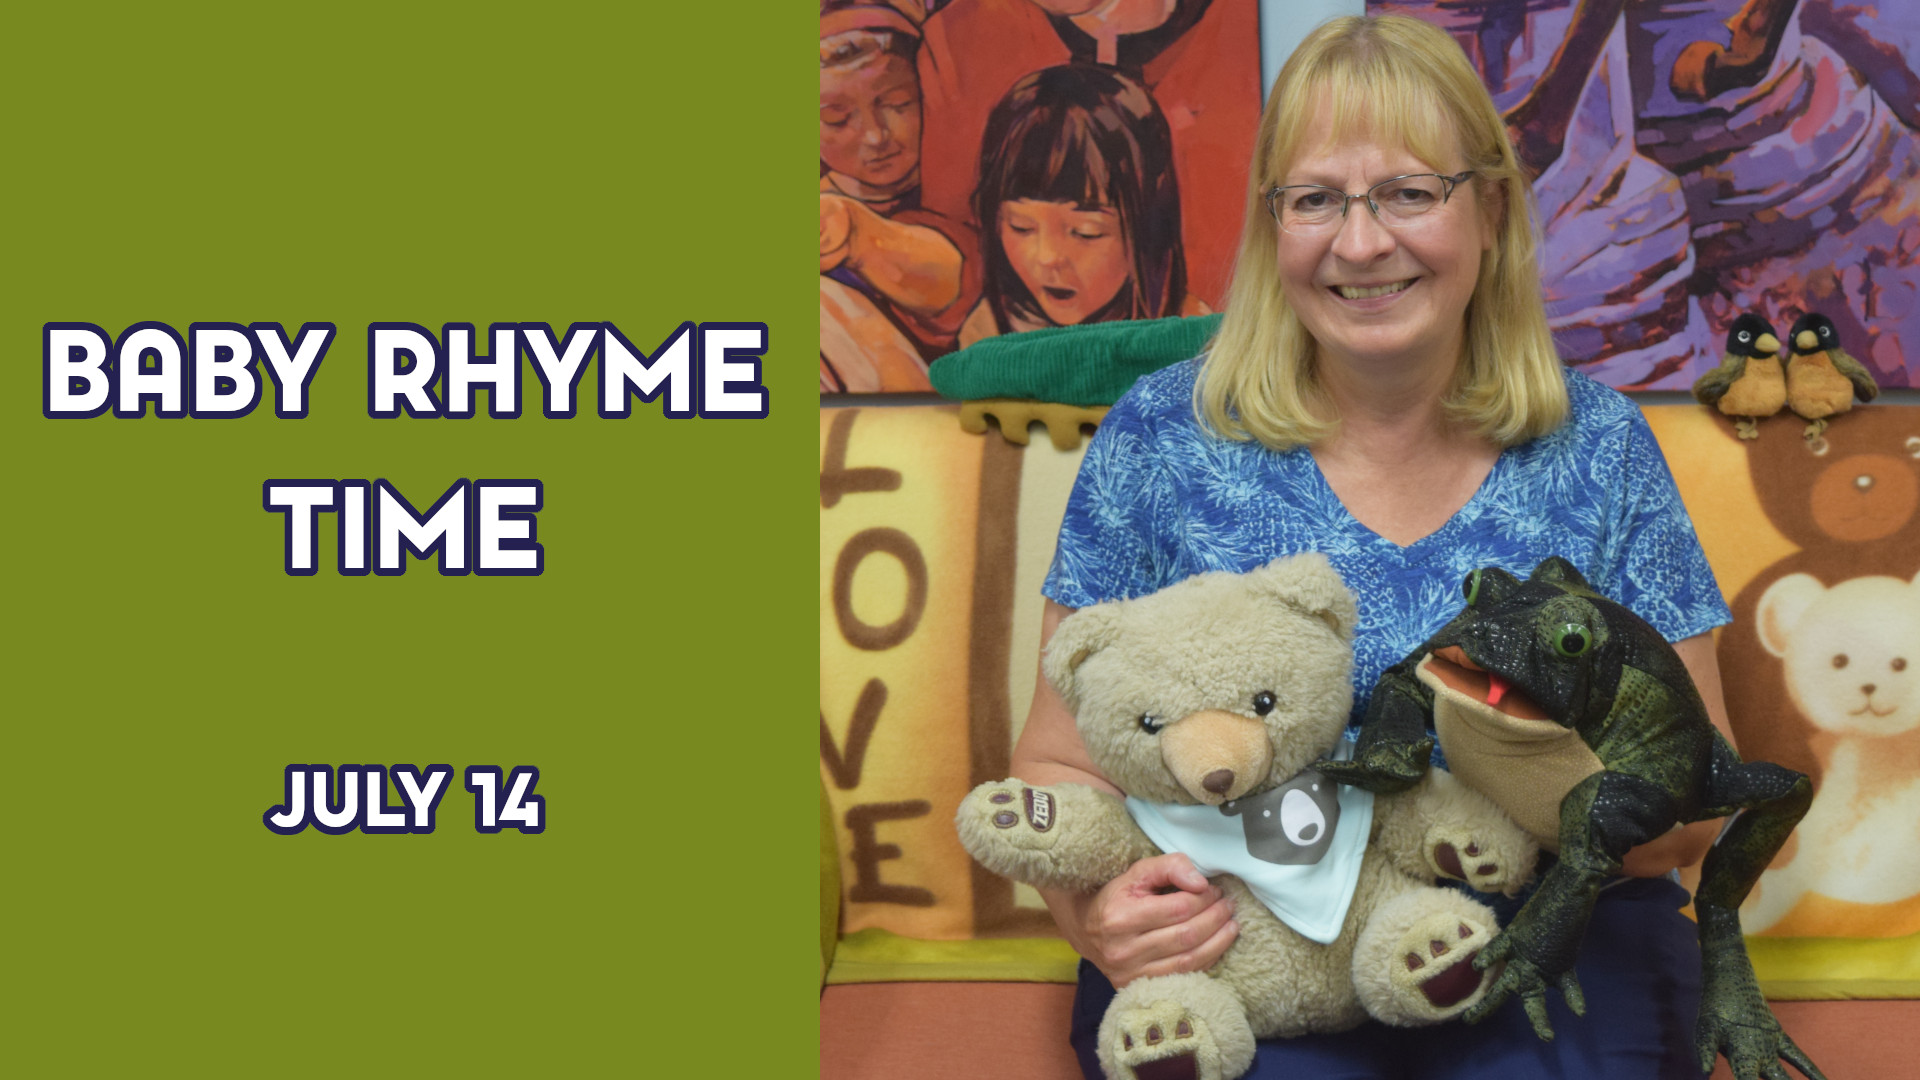 A woman holds stuffed animals next to the text "Baby Rhyme Time July 14"